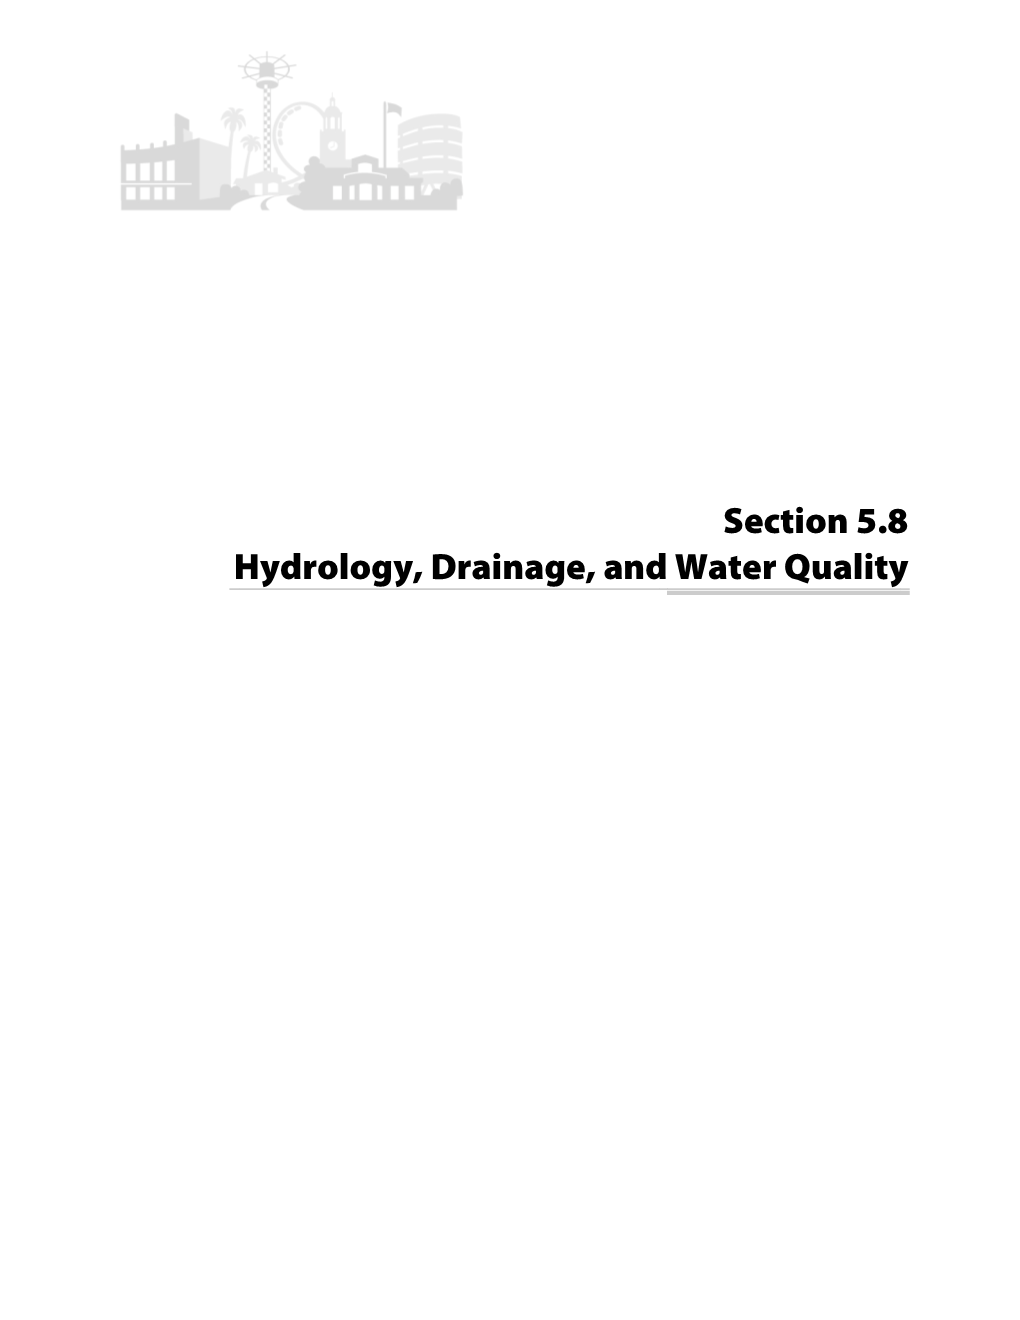 Section 5.8 Hydrology, Drainage, and Water Quality